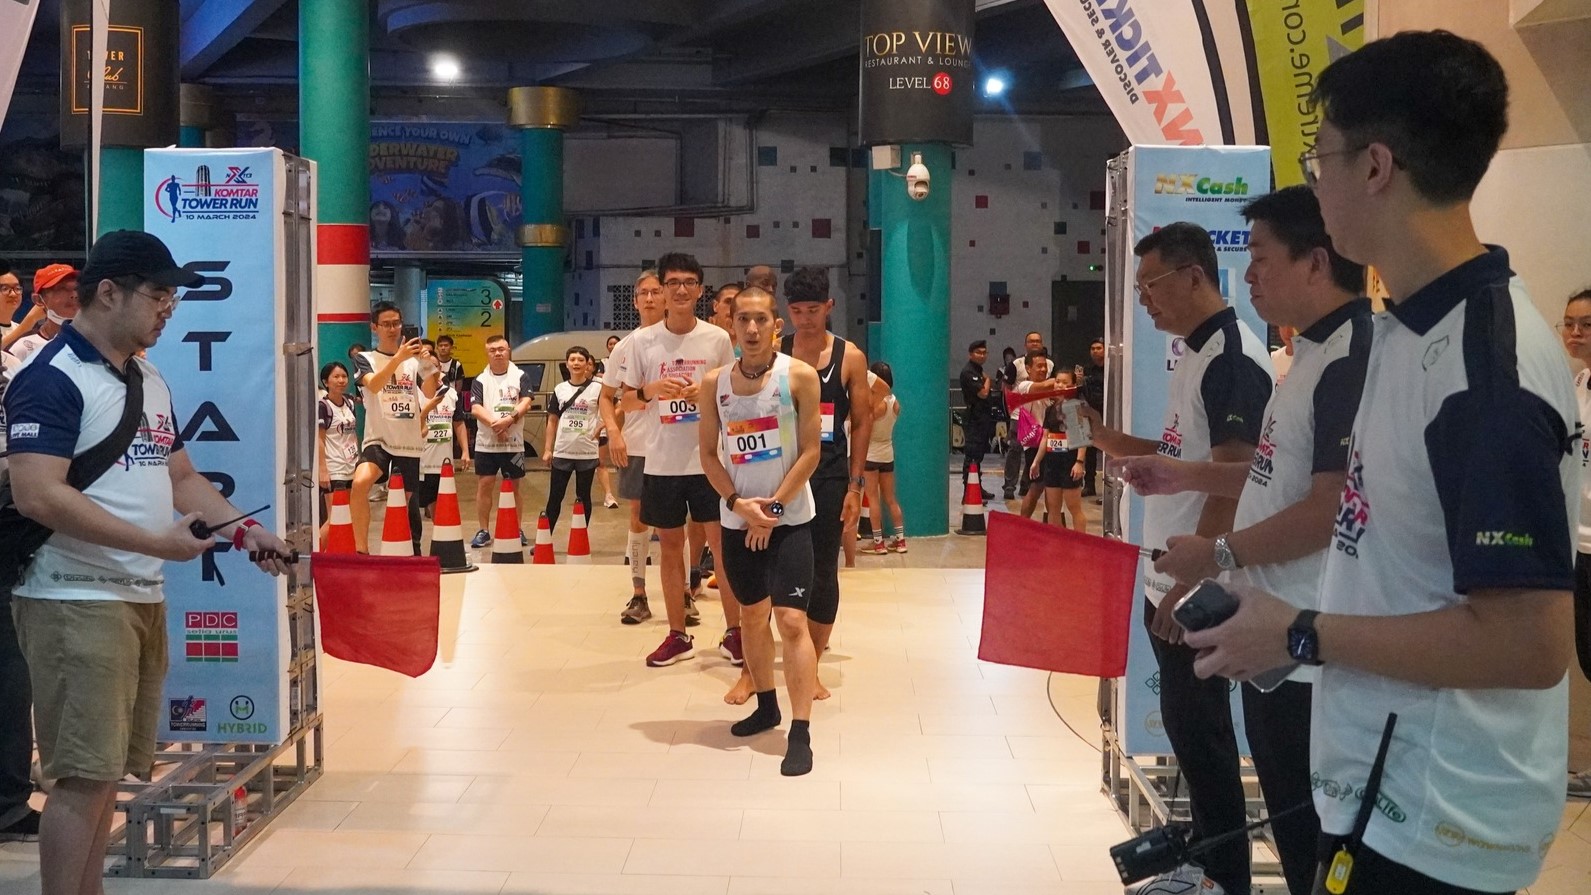 Towerrunning top dog Wai Ching aims to conquer Naza Tower